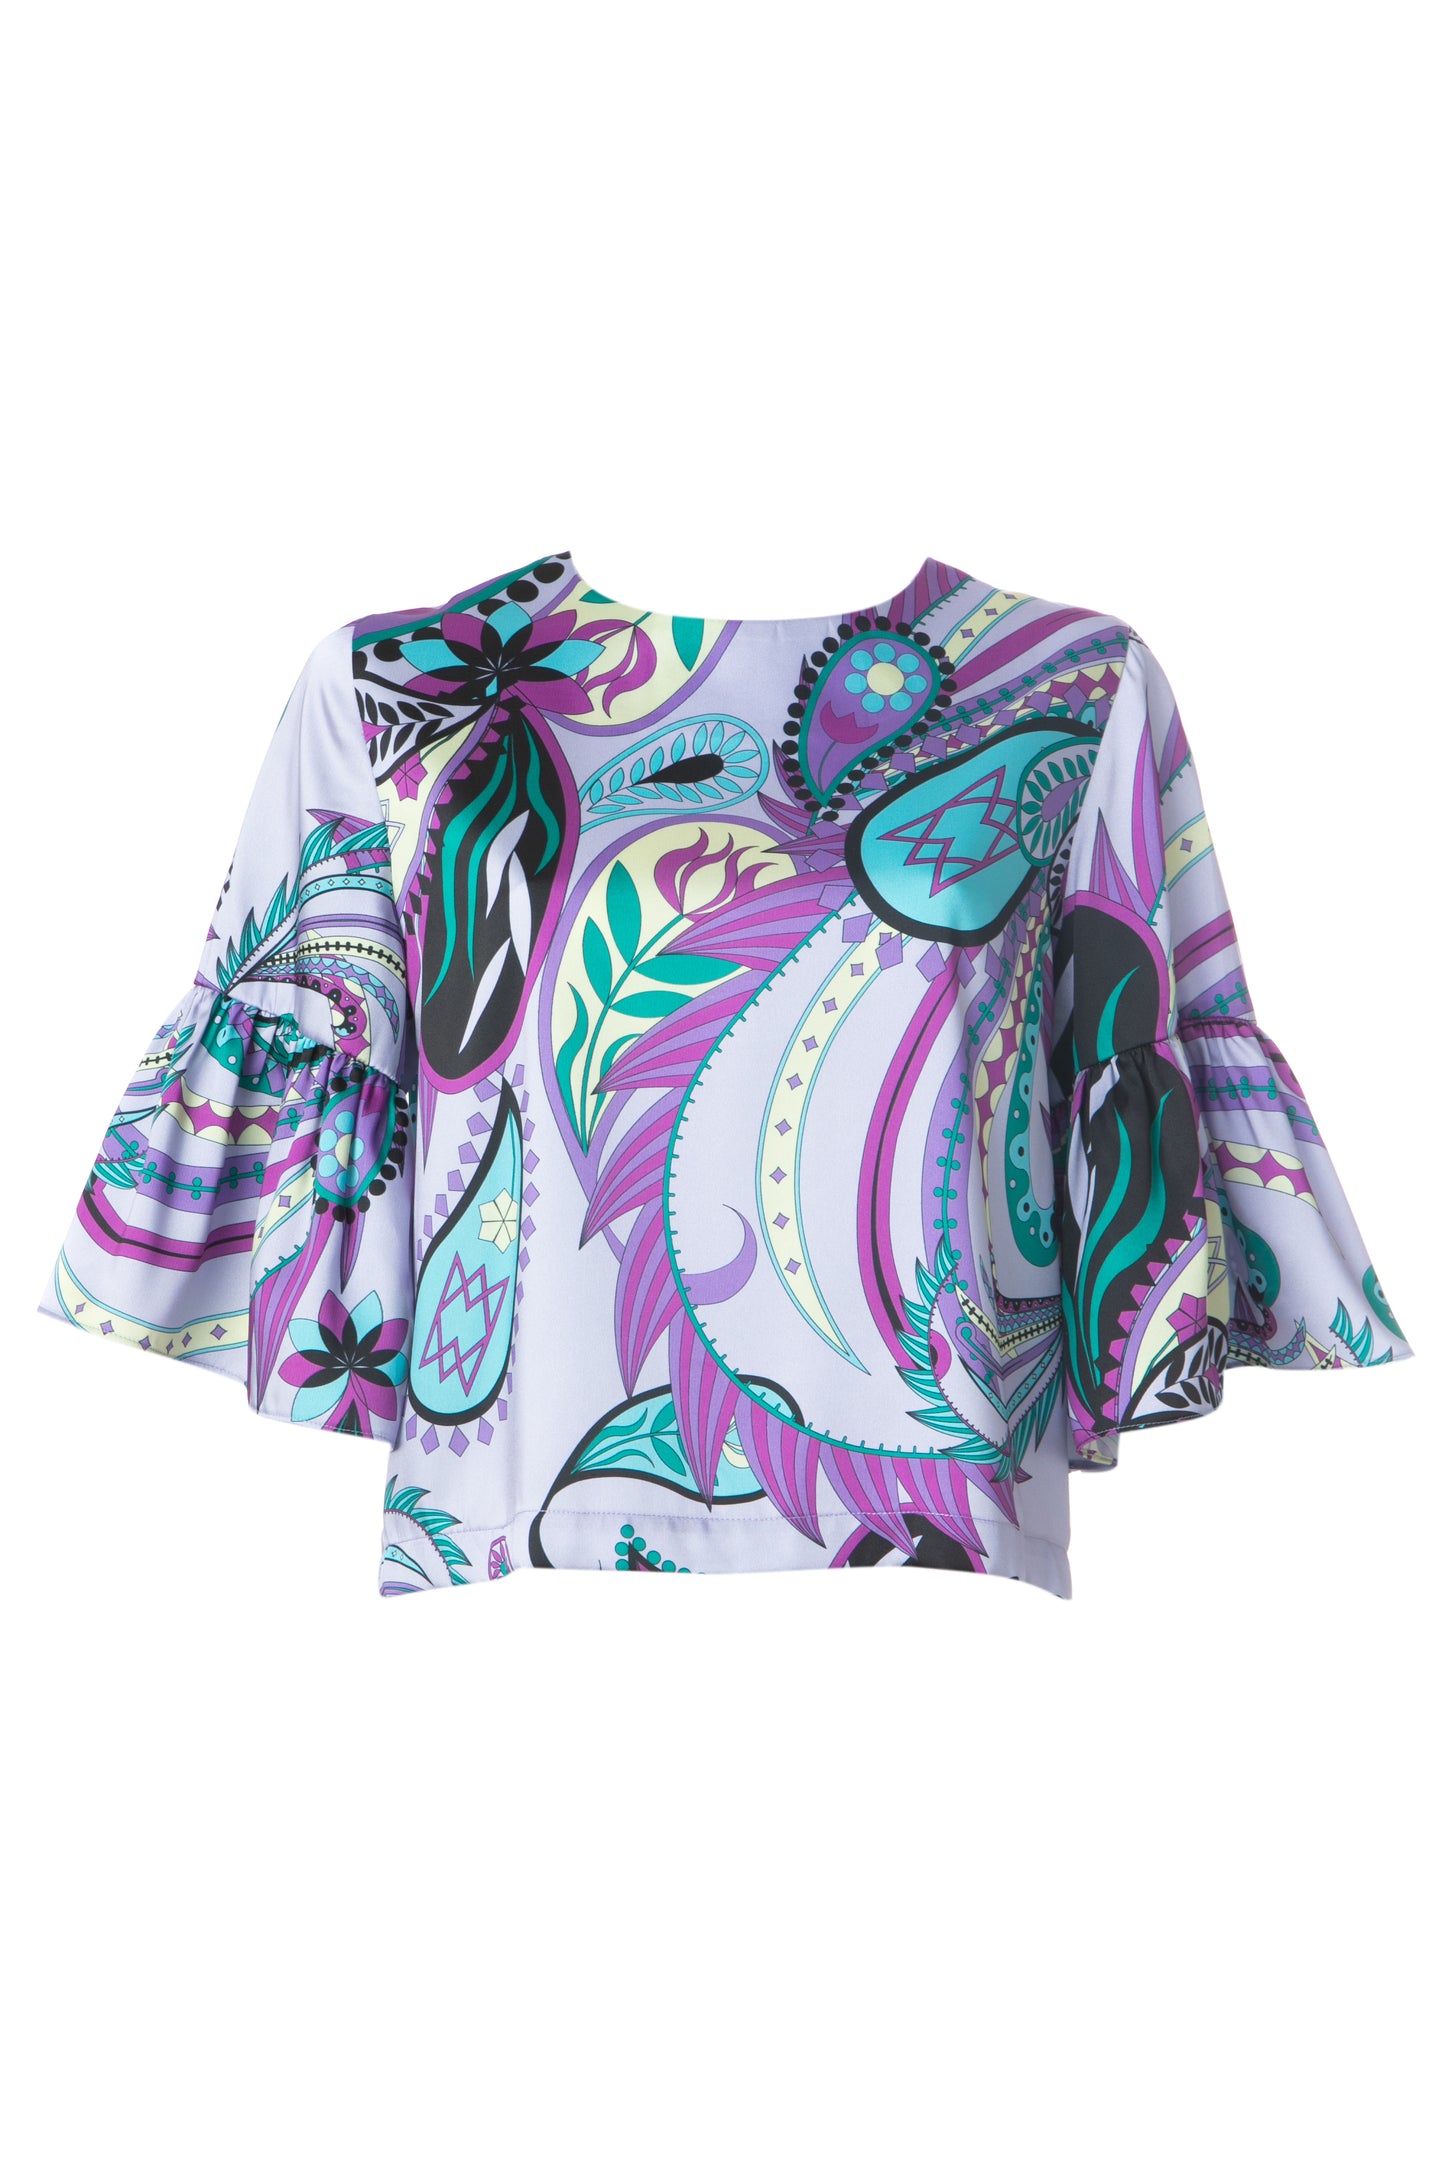 ANNABEL TOP - SILKY PAISLEY TOP WITH BELL SLEEVES